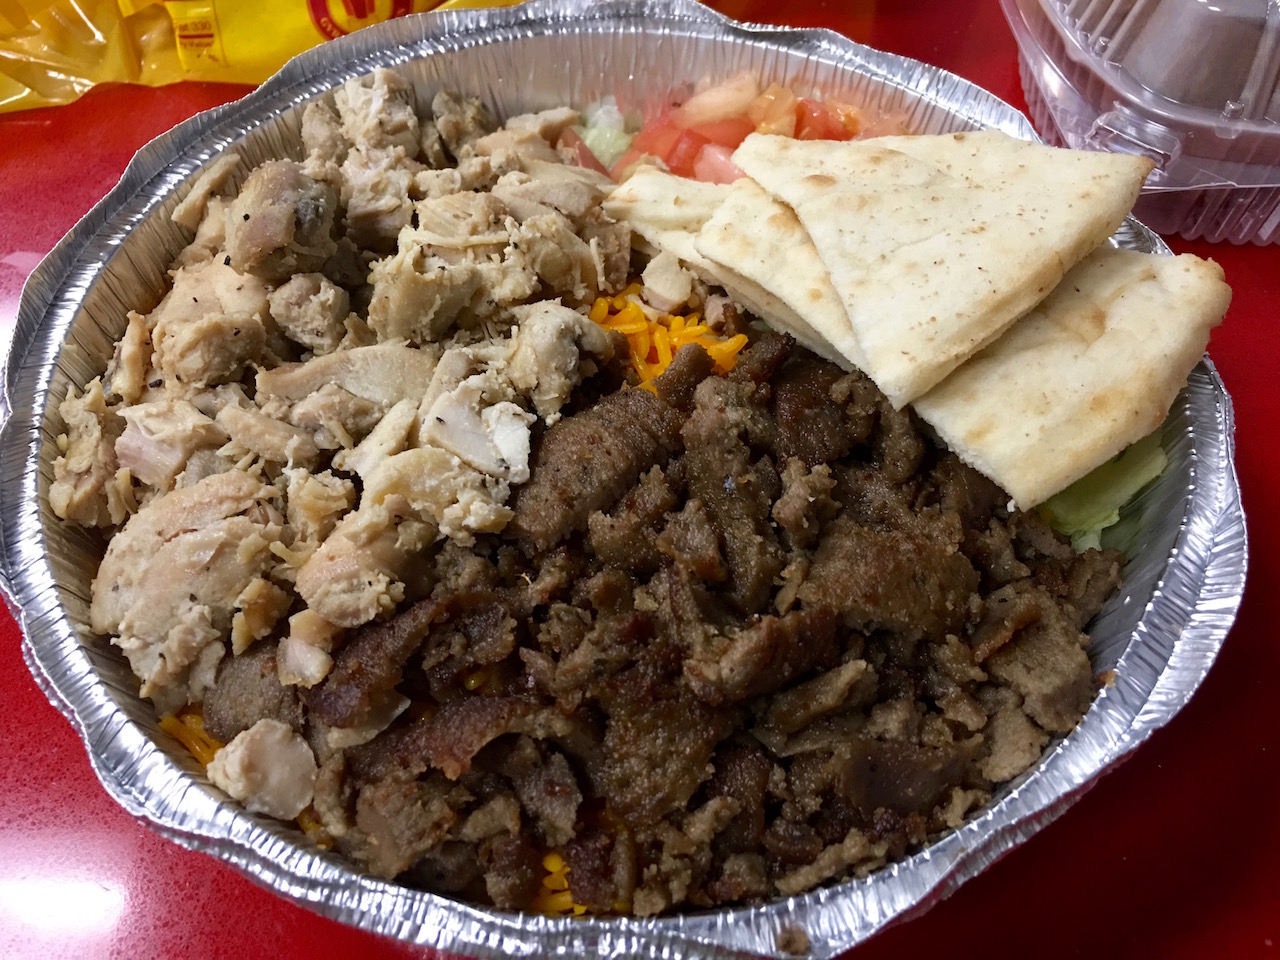 The Halal Guys Malaysia - Where to Find Halal Food in the USA: Top 5